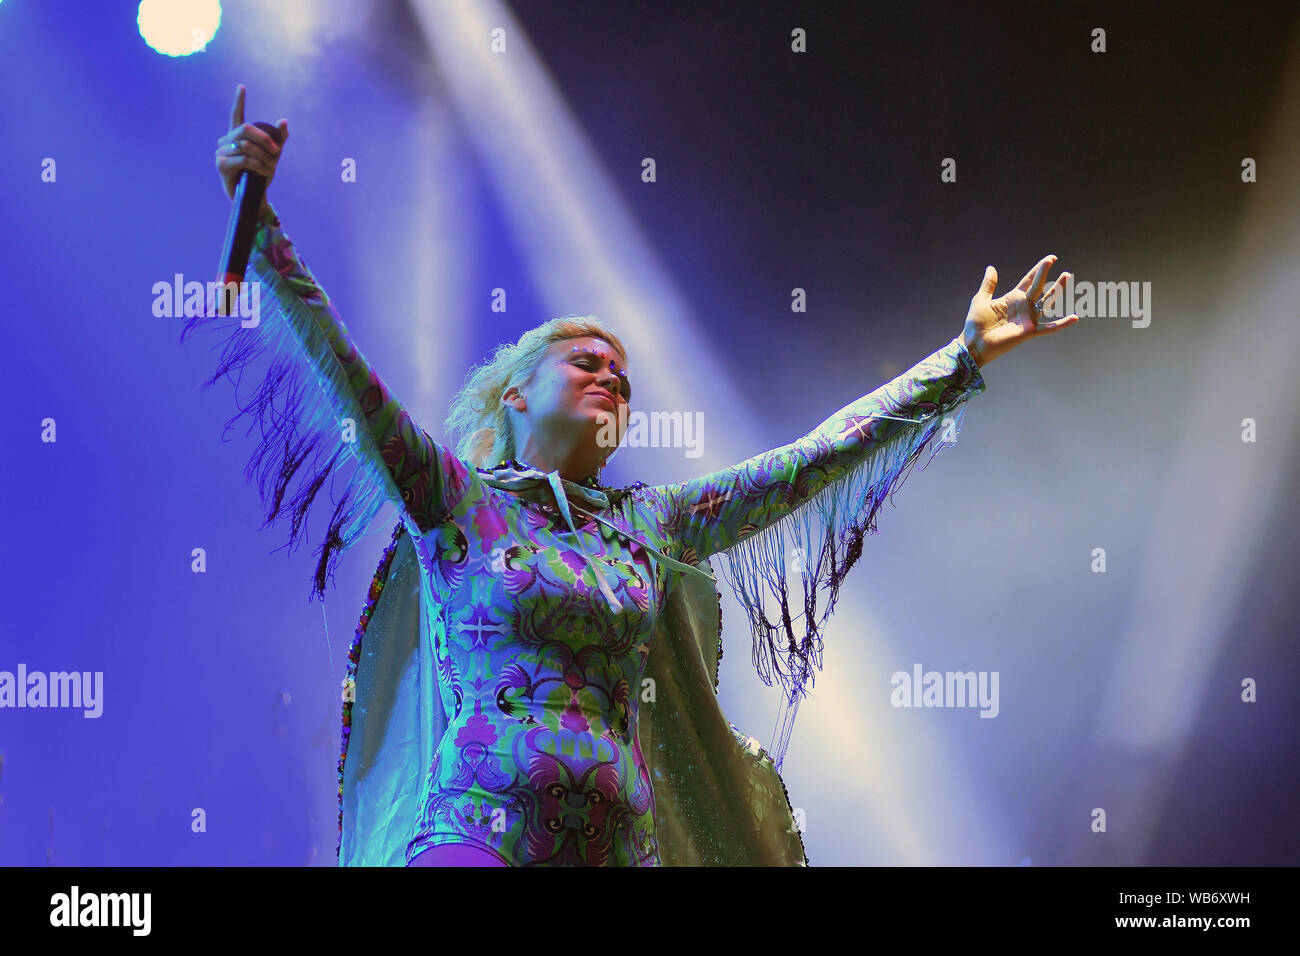 Rio de Janeiro, September 23, 2017. Vocalist Li Saumet of the band Bomba Estéreo, during the performance of his show on the Sunset stage of Rock in Ri Stock Photo